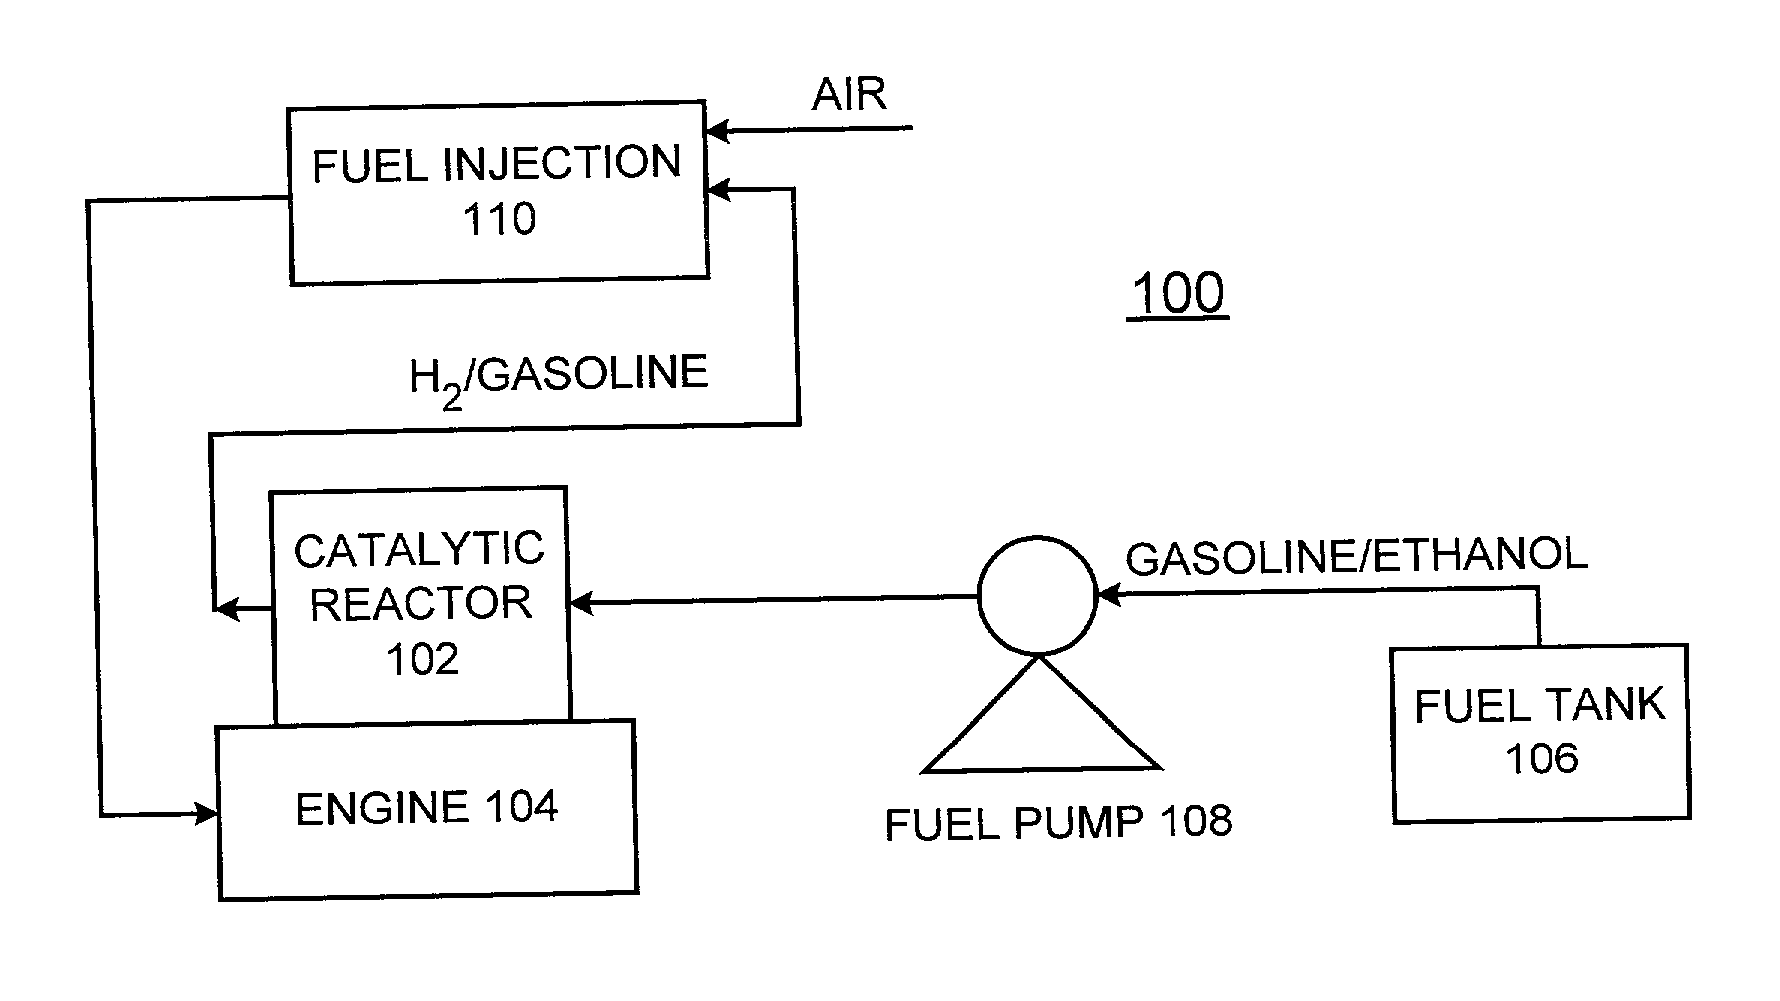 Process for in-situ production of hydrogen (H2) by alcohol decomposition for emission reduction from internal combustion engines